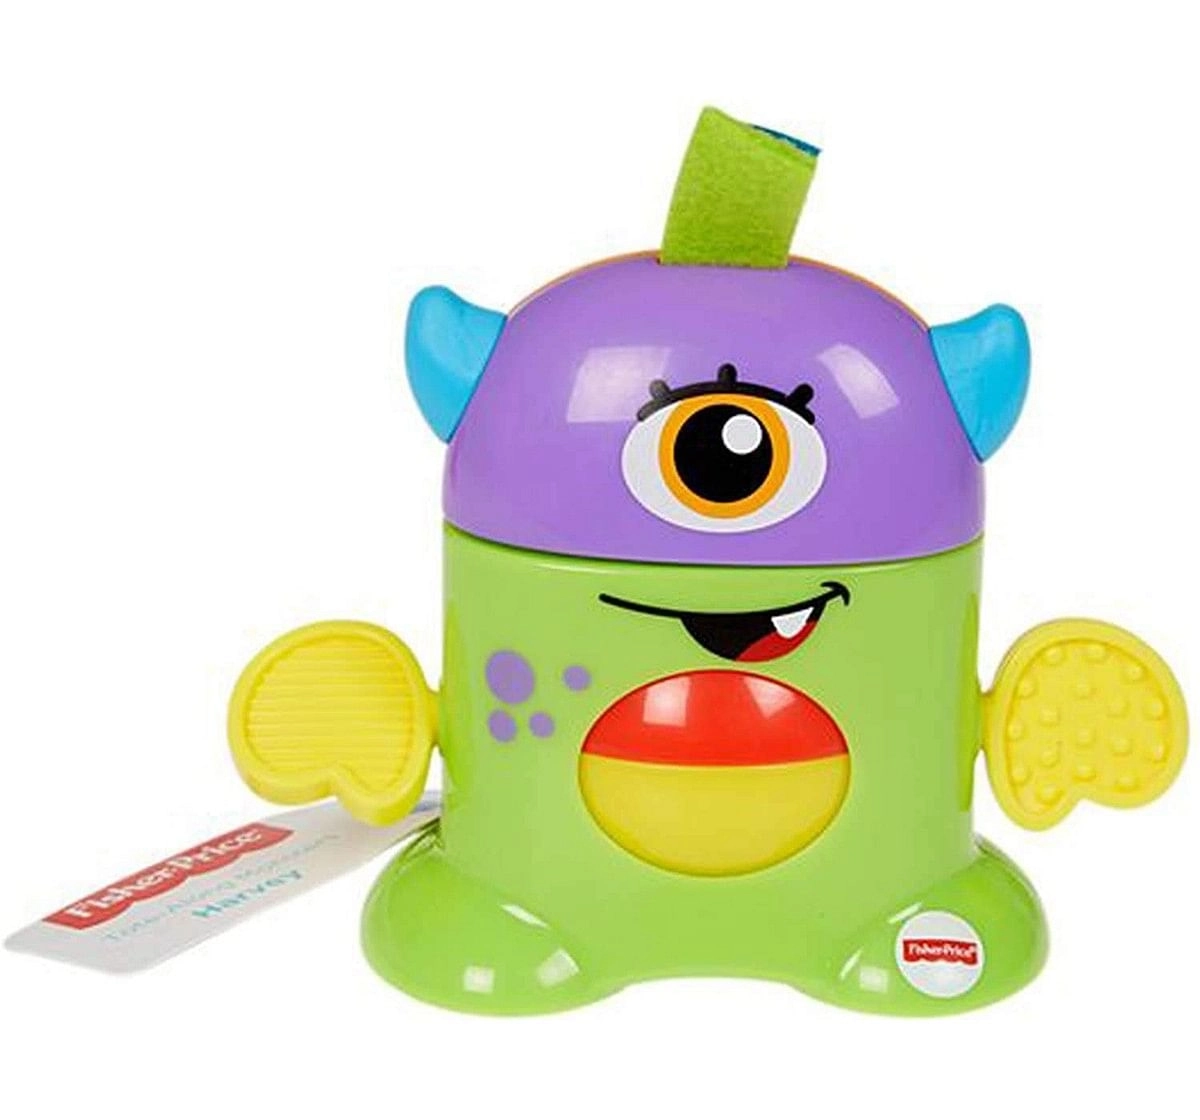 Fisher Price Tote - Along Monster Early Learner Toys for Kids age 6M+, Assorted